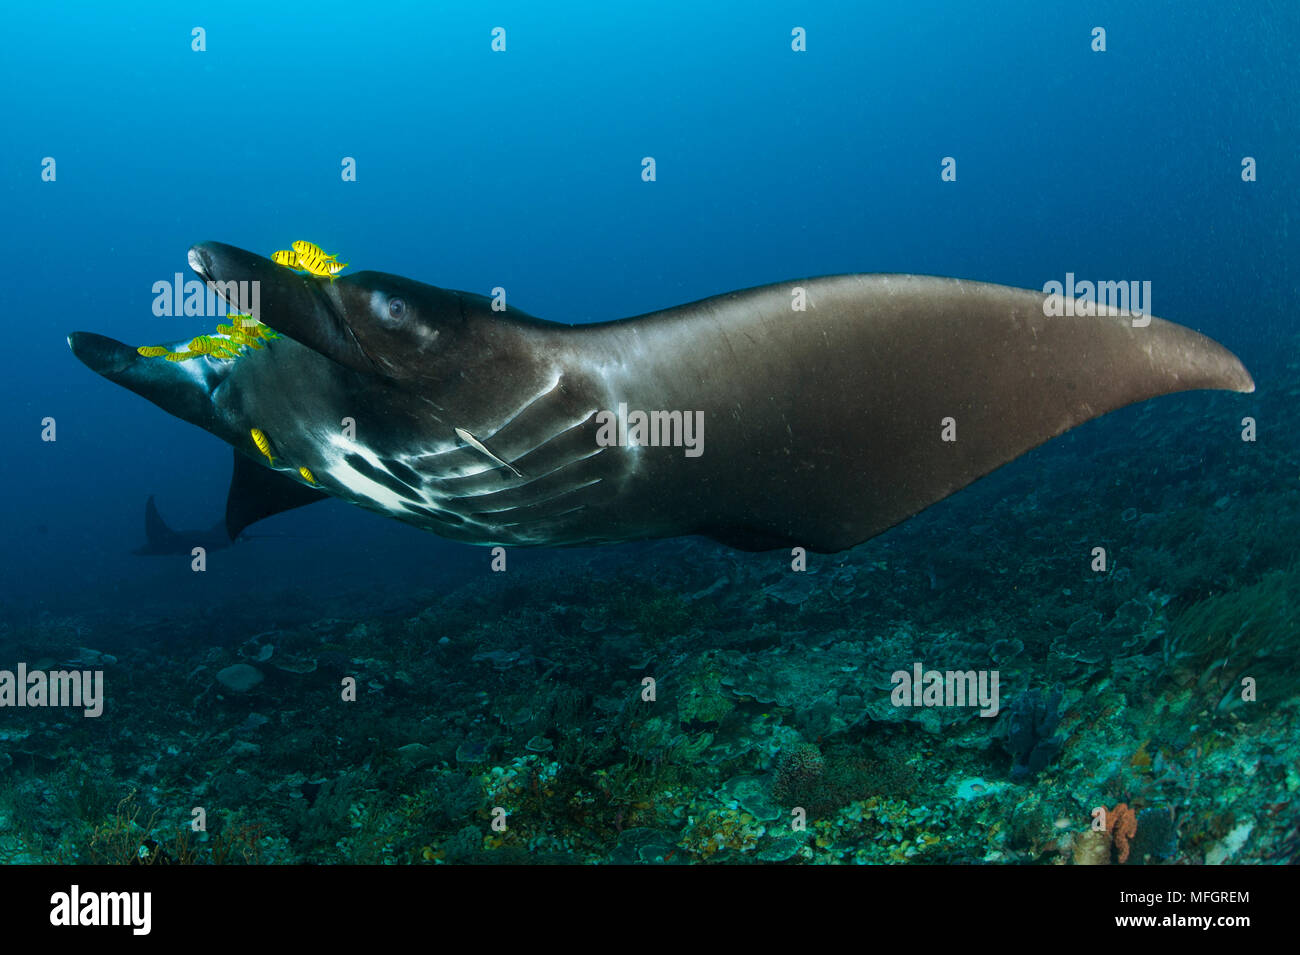 The reef manta ray, Manta alfredi, with yellow pilot fish in front of its mouth, Dampier Strait, Raja Ampat, West Papua, Indonesia Stock Photo